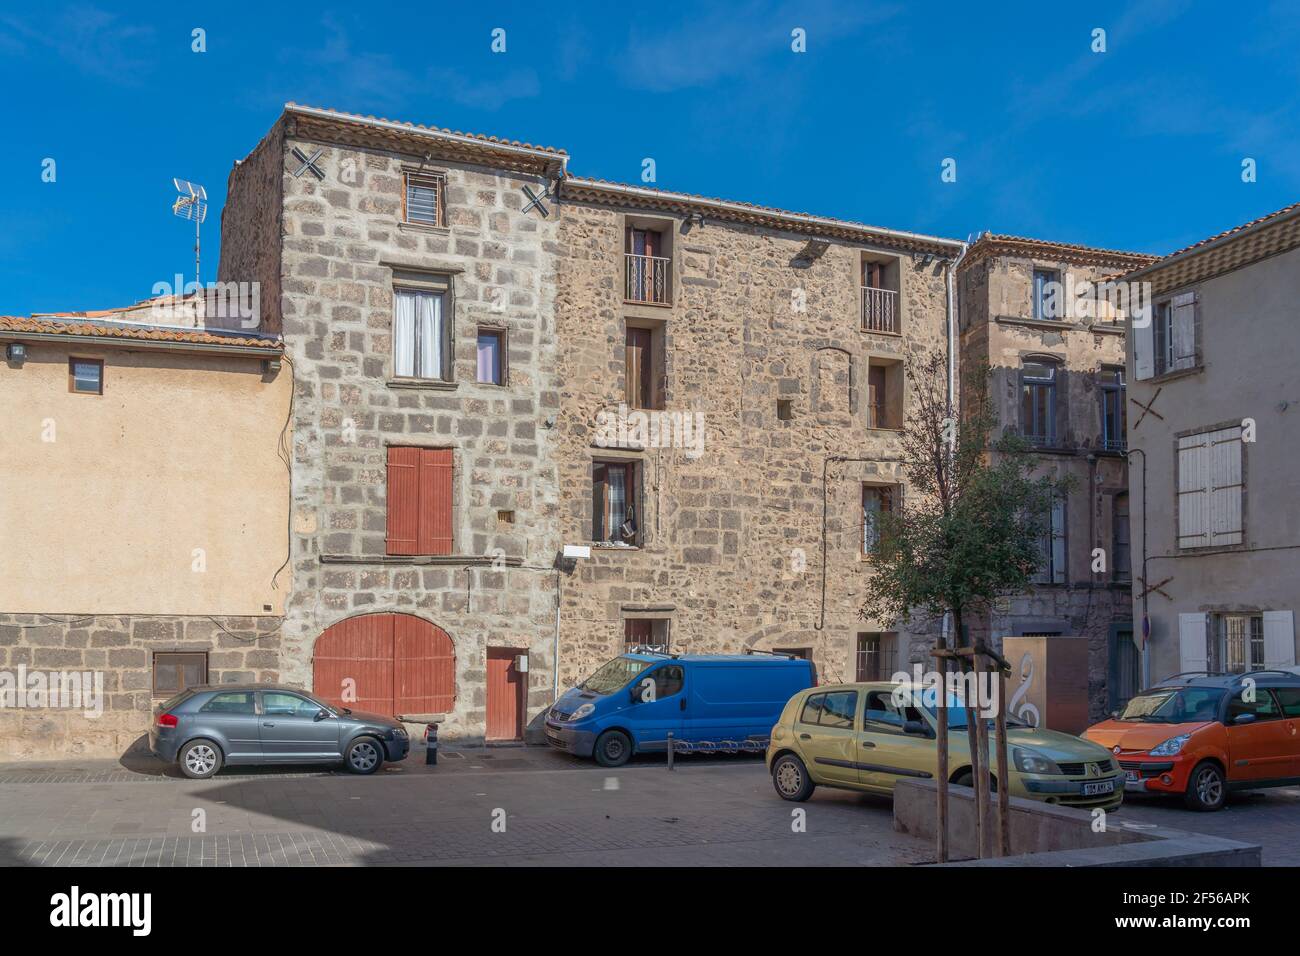 AGDE, FRANCE - July 19th, 2020 : Agde Centre with old Buildings, street view of the town Stock Photo